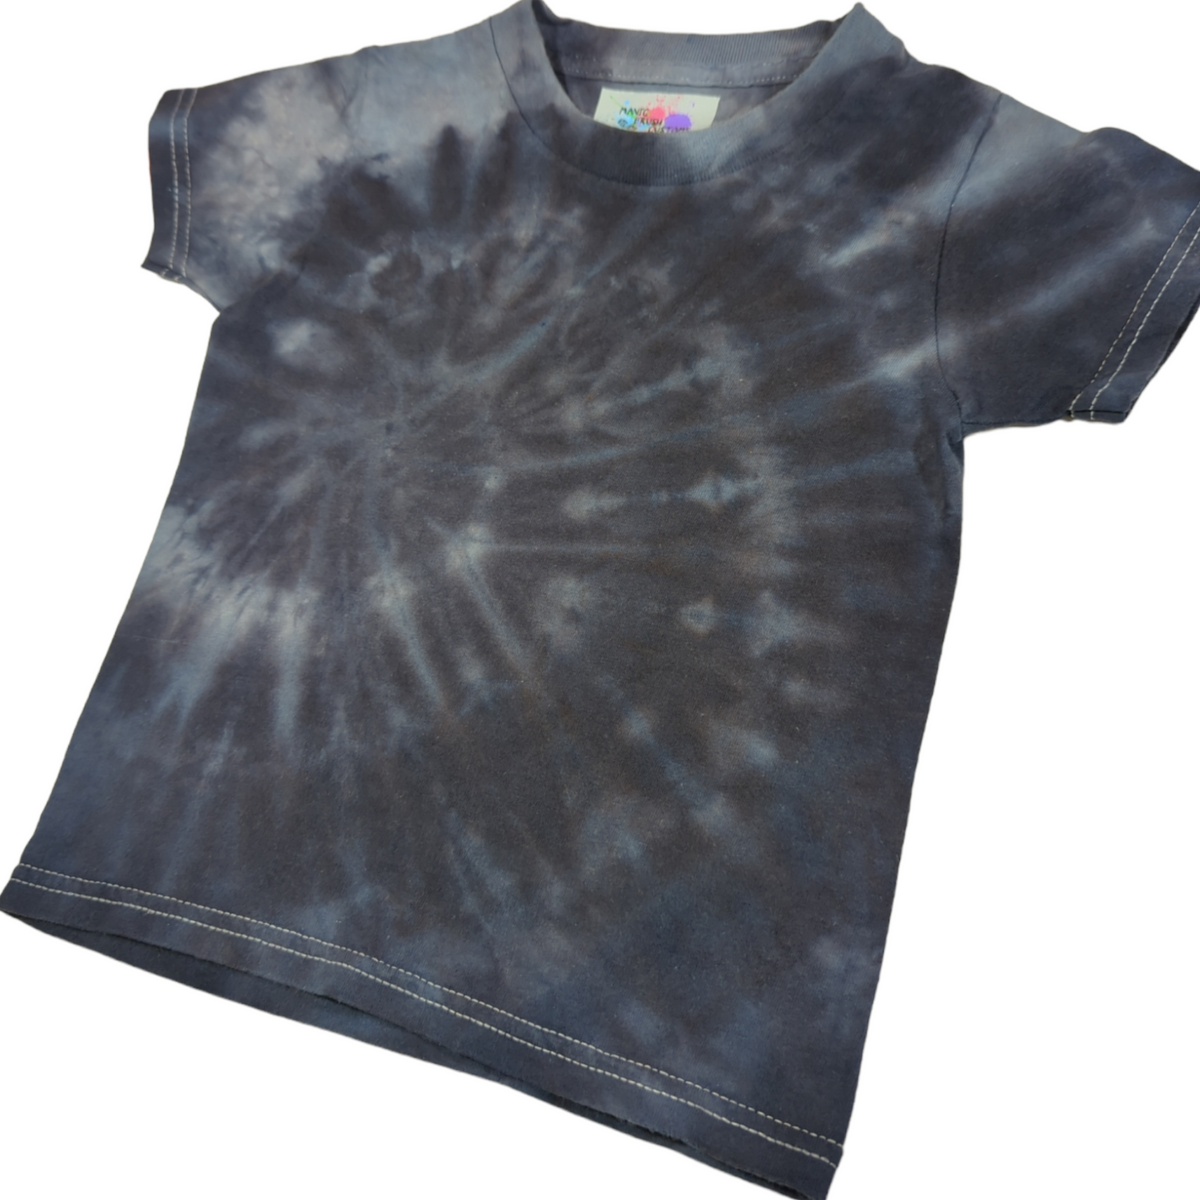 Blue, grey and blacktie dye shirt by